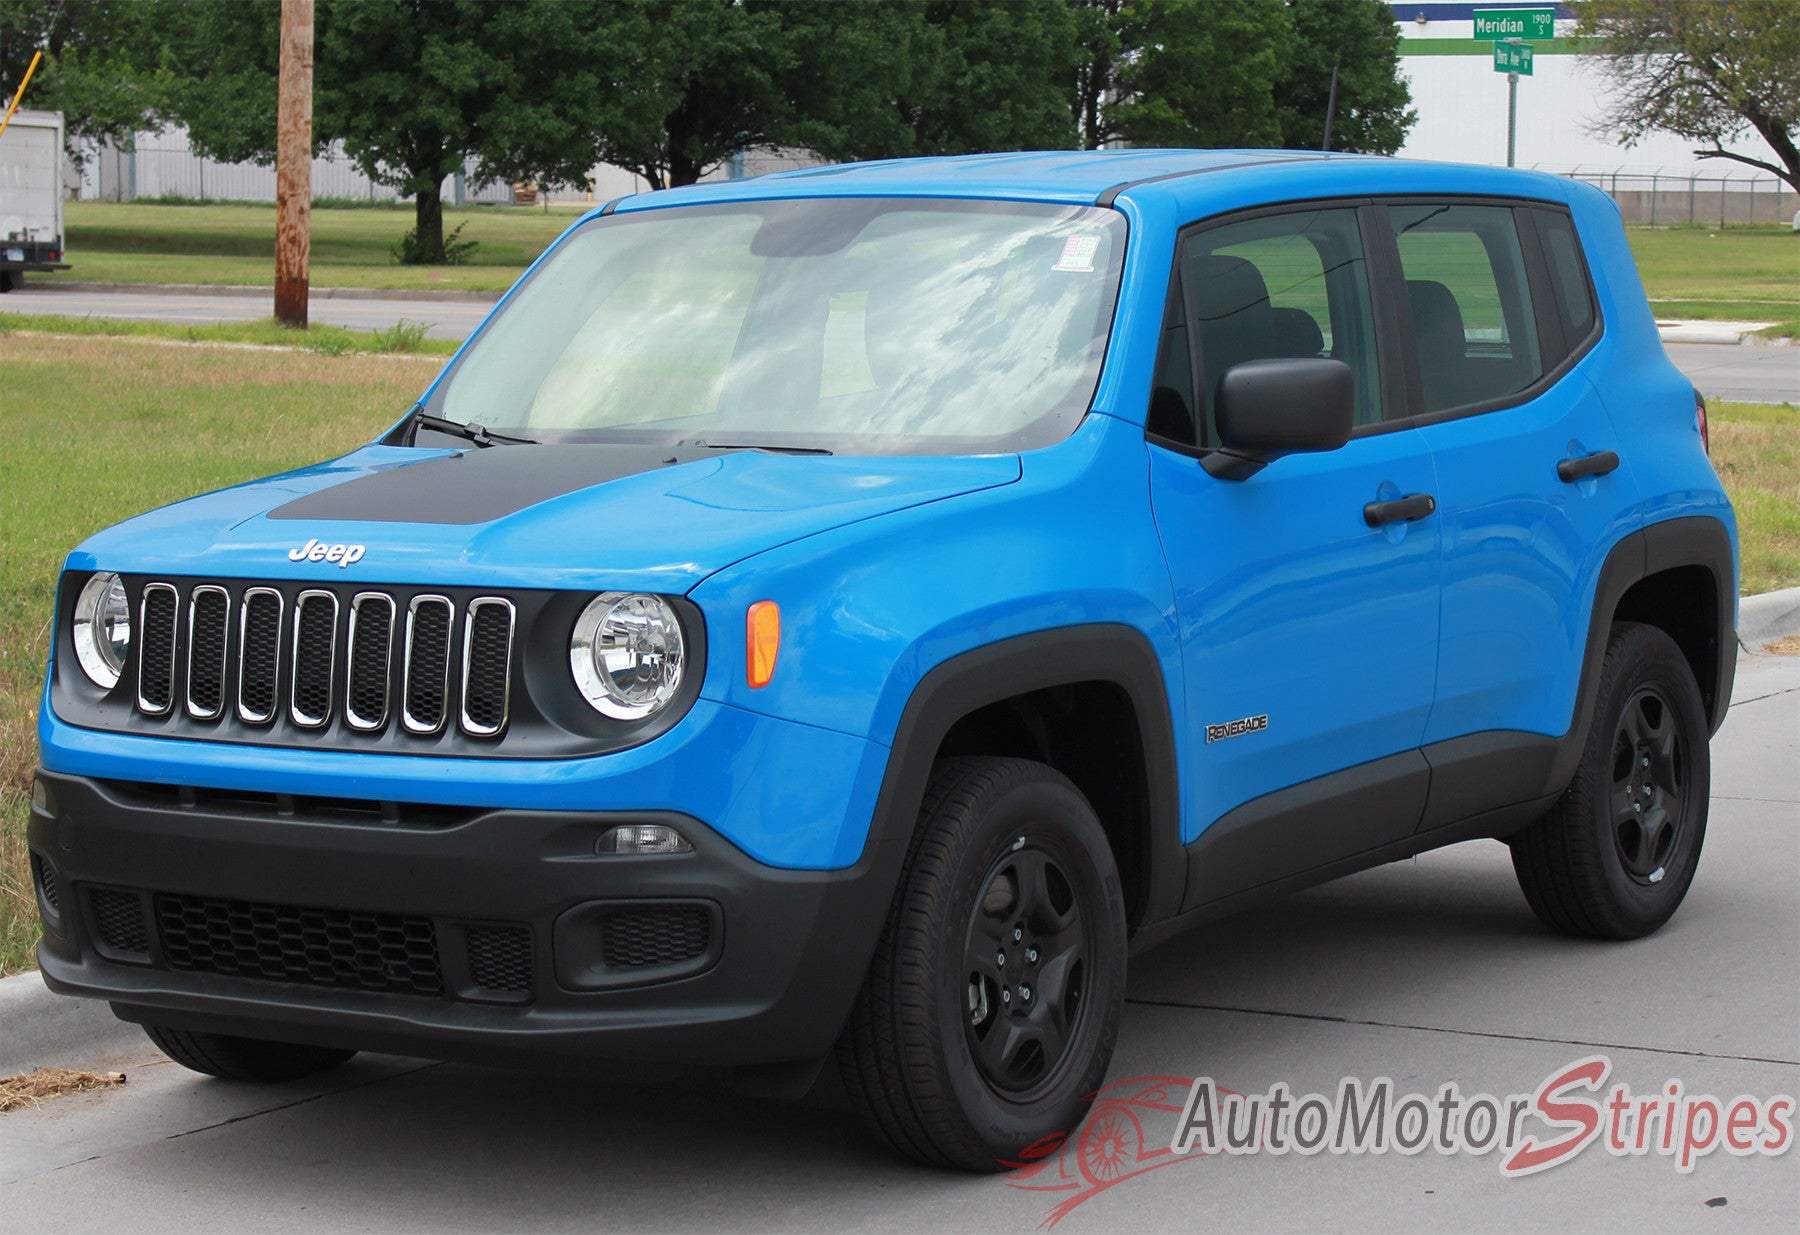 Automotive Graphics Decals Fusionmagazine Org 15 19 Jeep Renegade Trailhawk Vinyl Decal Graphic 3m Hood Stripe Fits